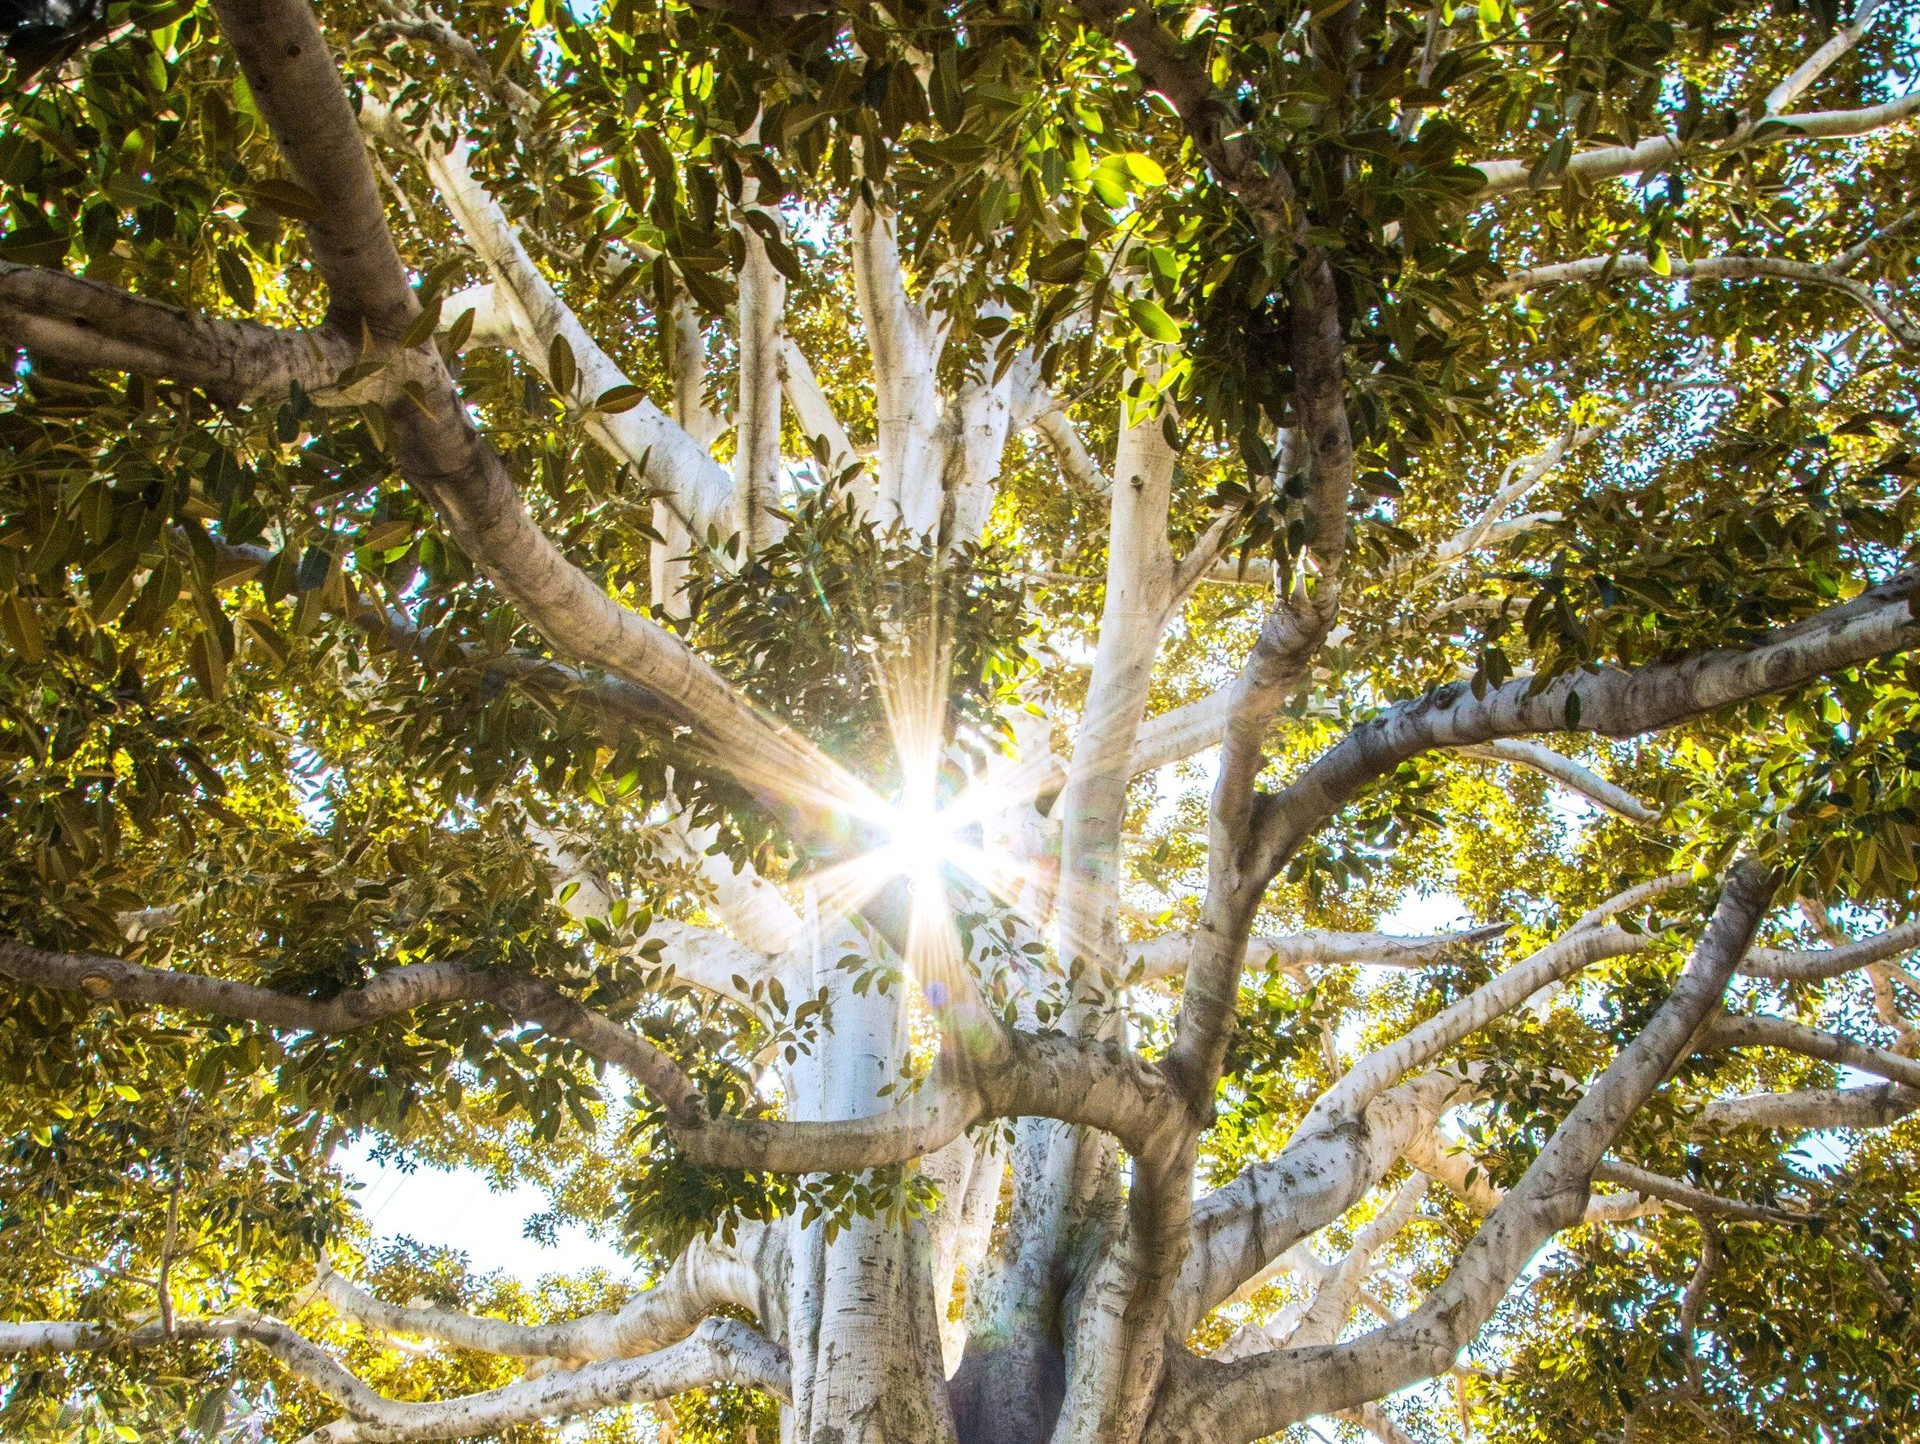 A large tree with light shining through the twisting branches.